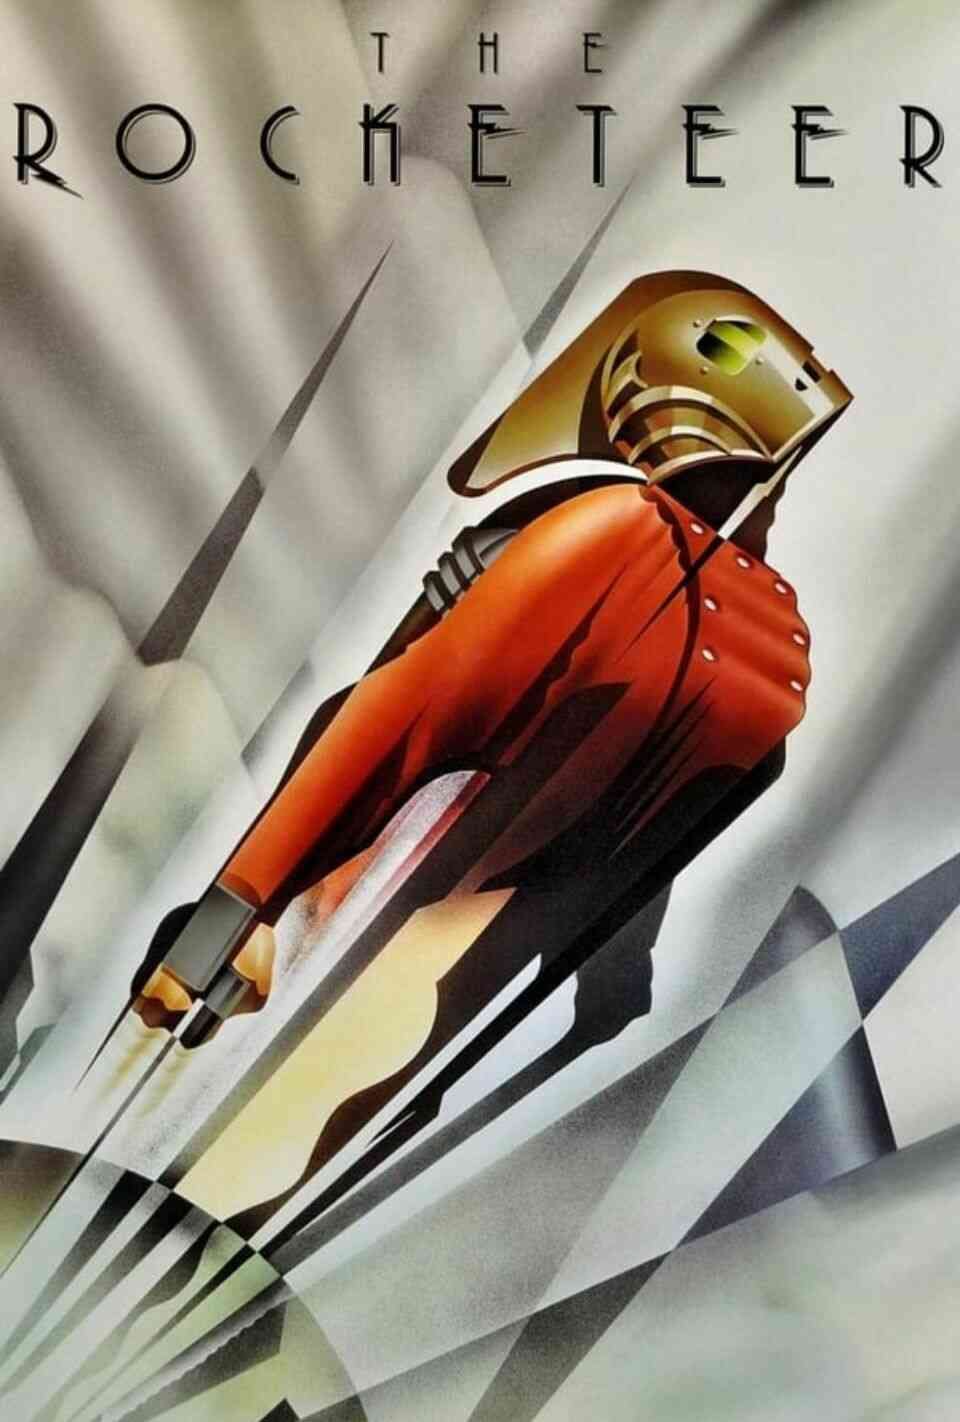 Read The Rocketeer screenplay (poster)